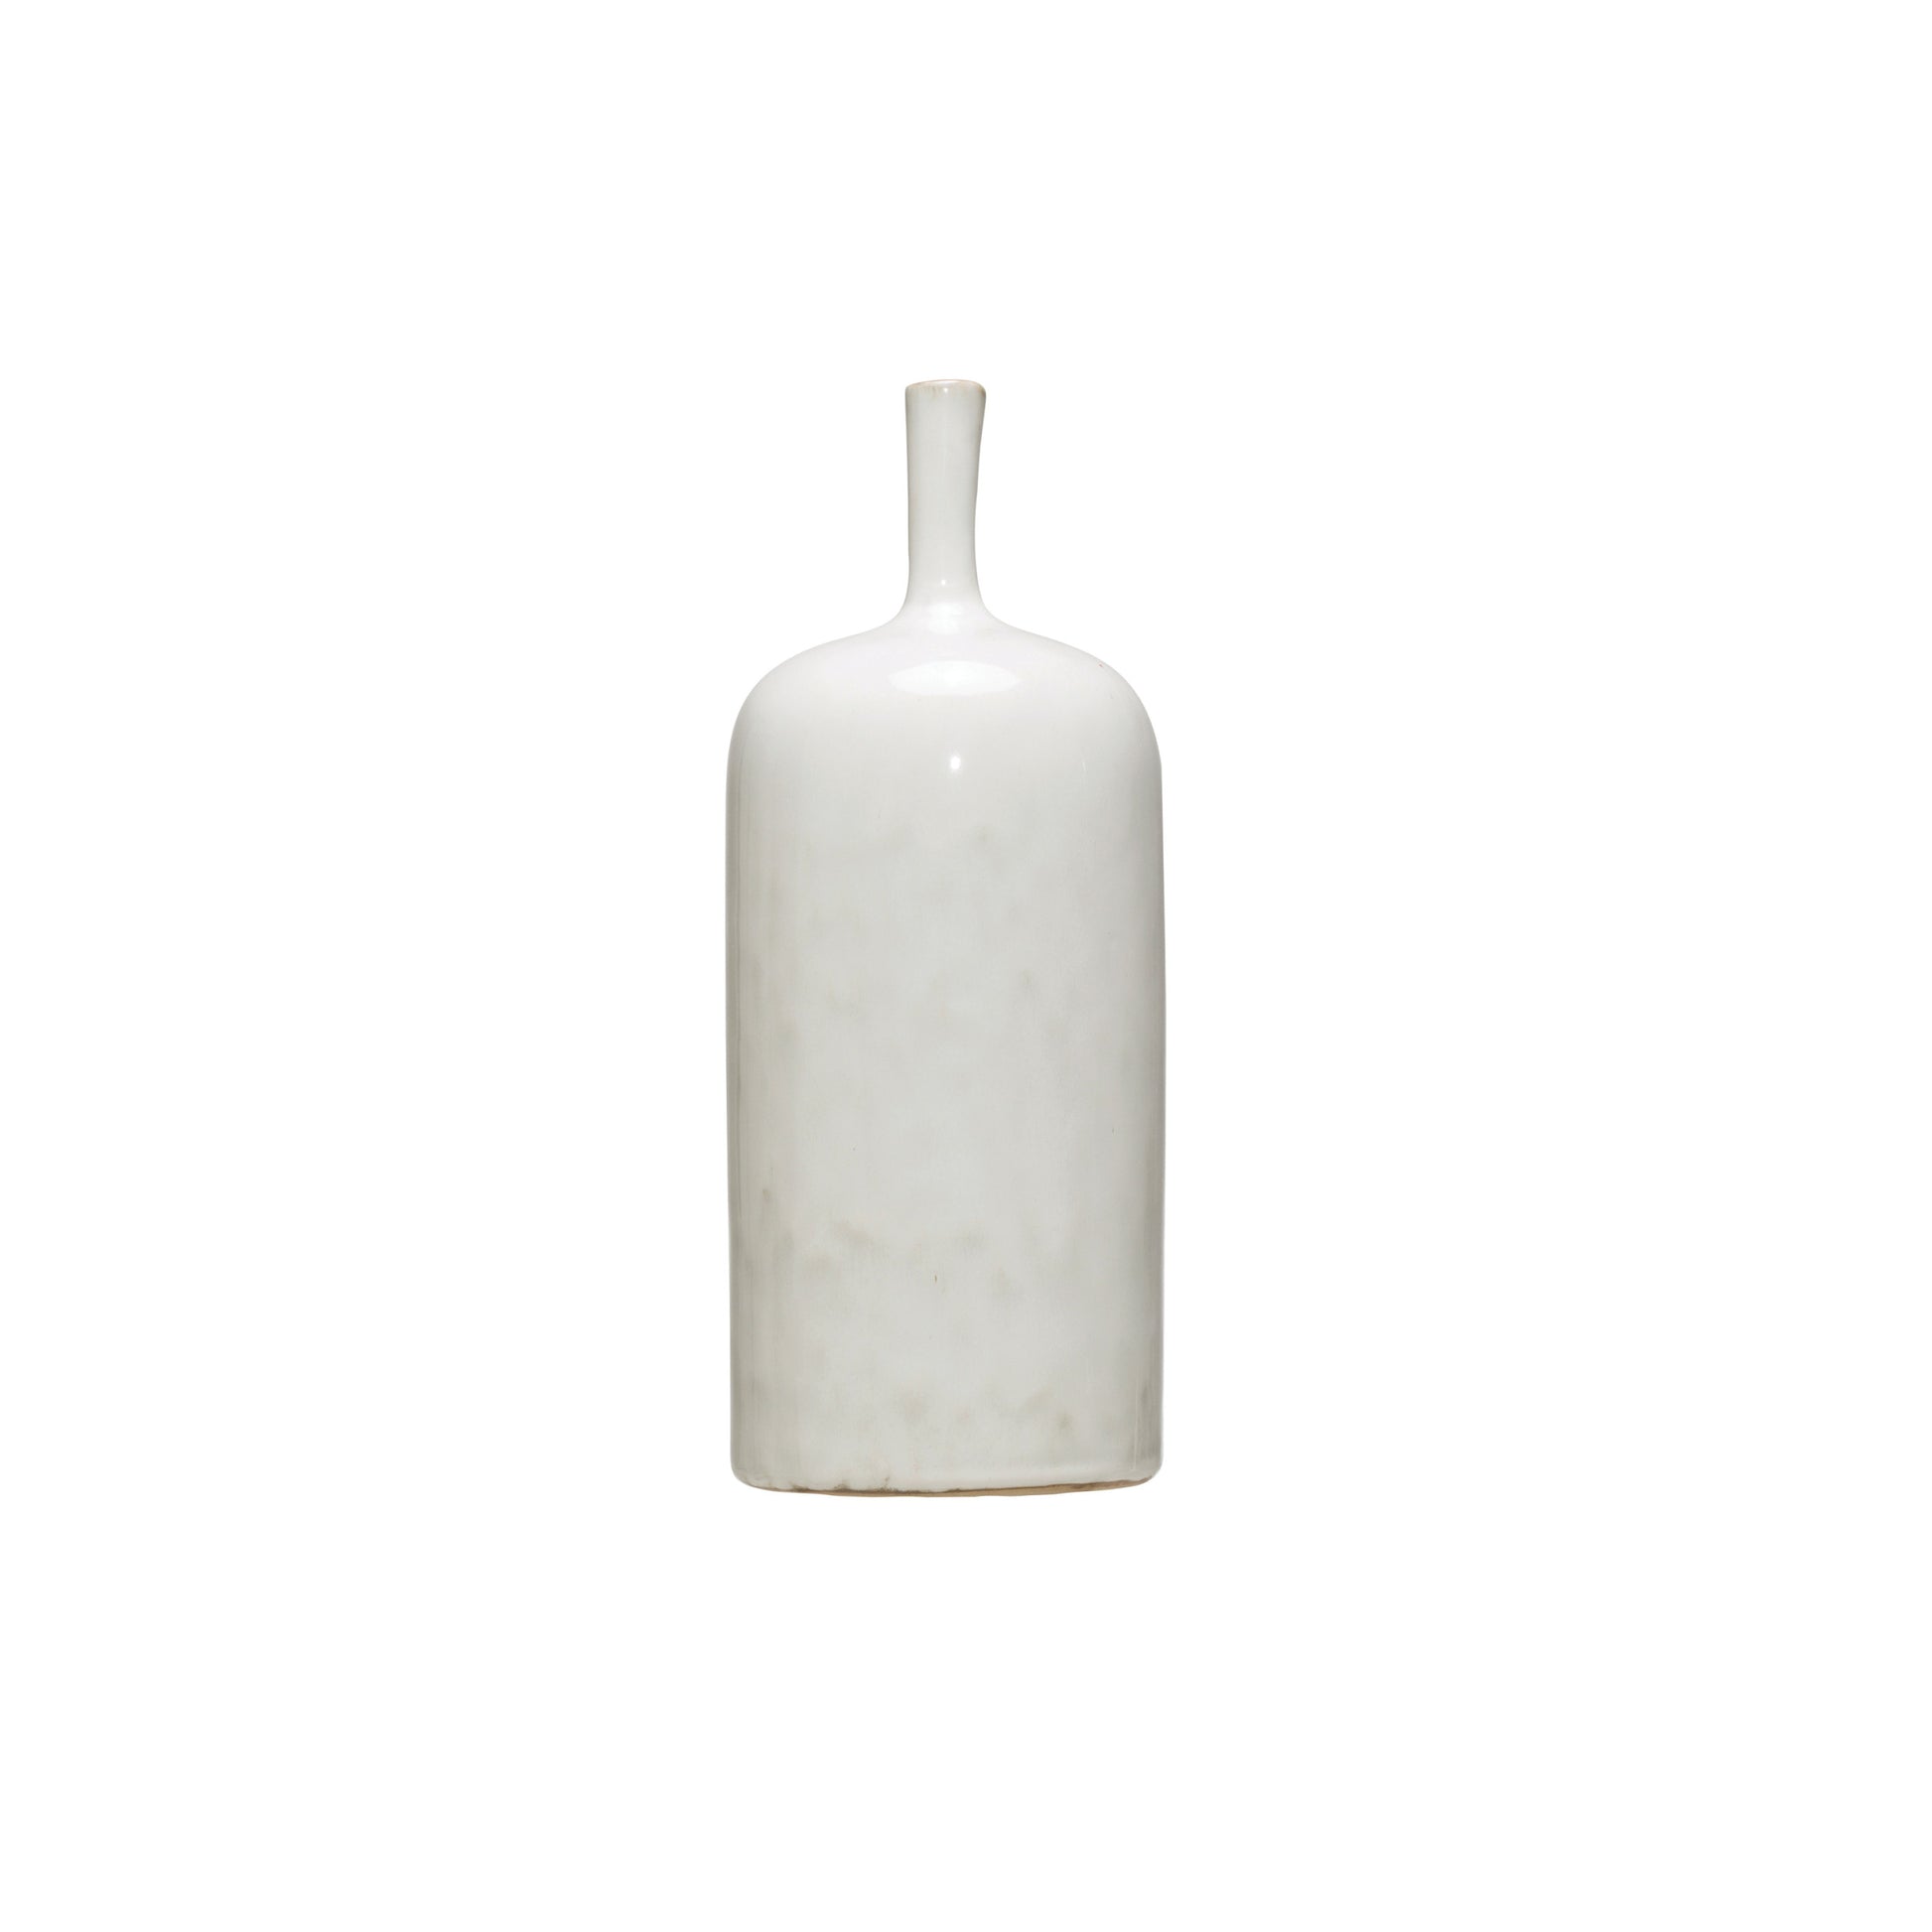 Vella Vase with Glaze - A beautiful Vella Vase with Glaze from GRACE BLU SHOPPE, perfect for displaying your favorite blooms or as a standalone piece.